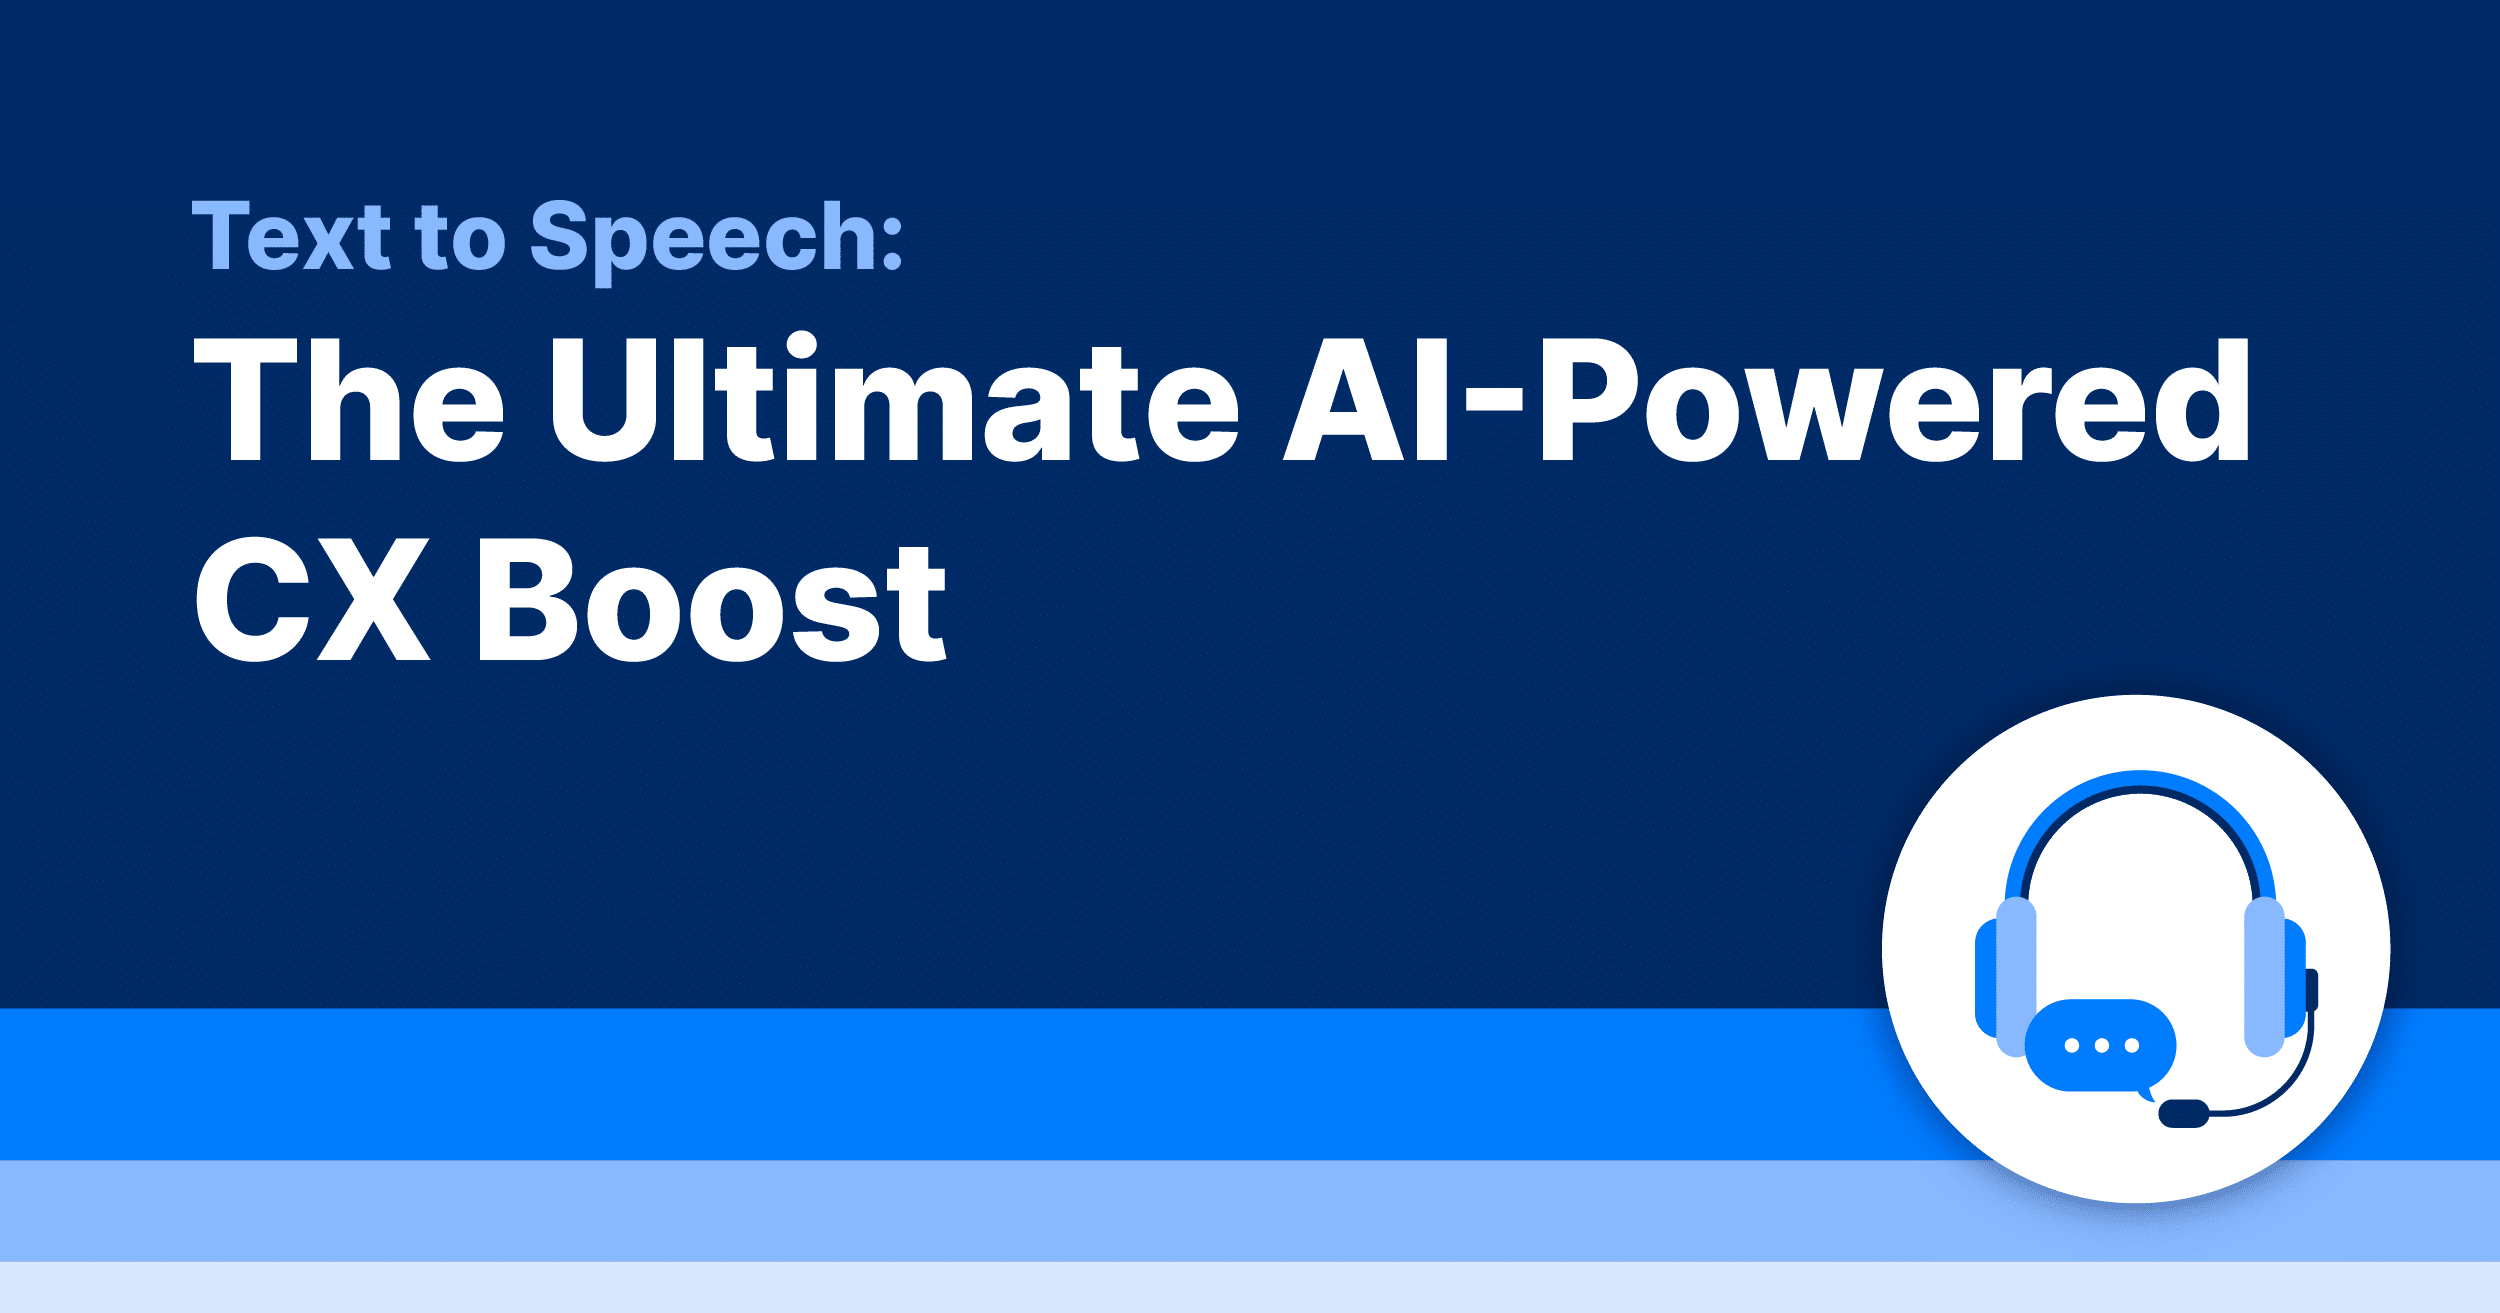 Text to Speech: The Ultimate AI-Powered CX Boost